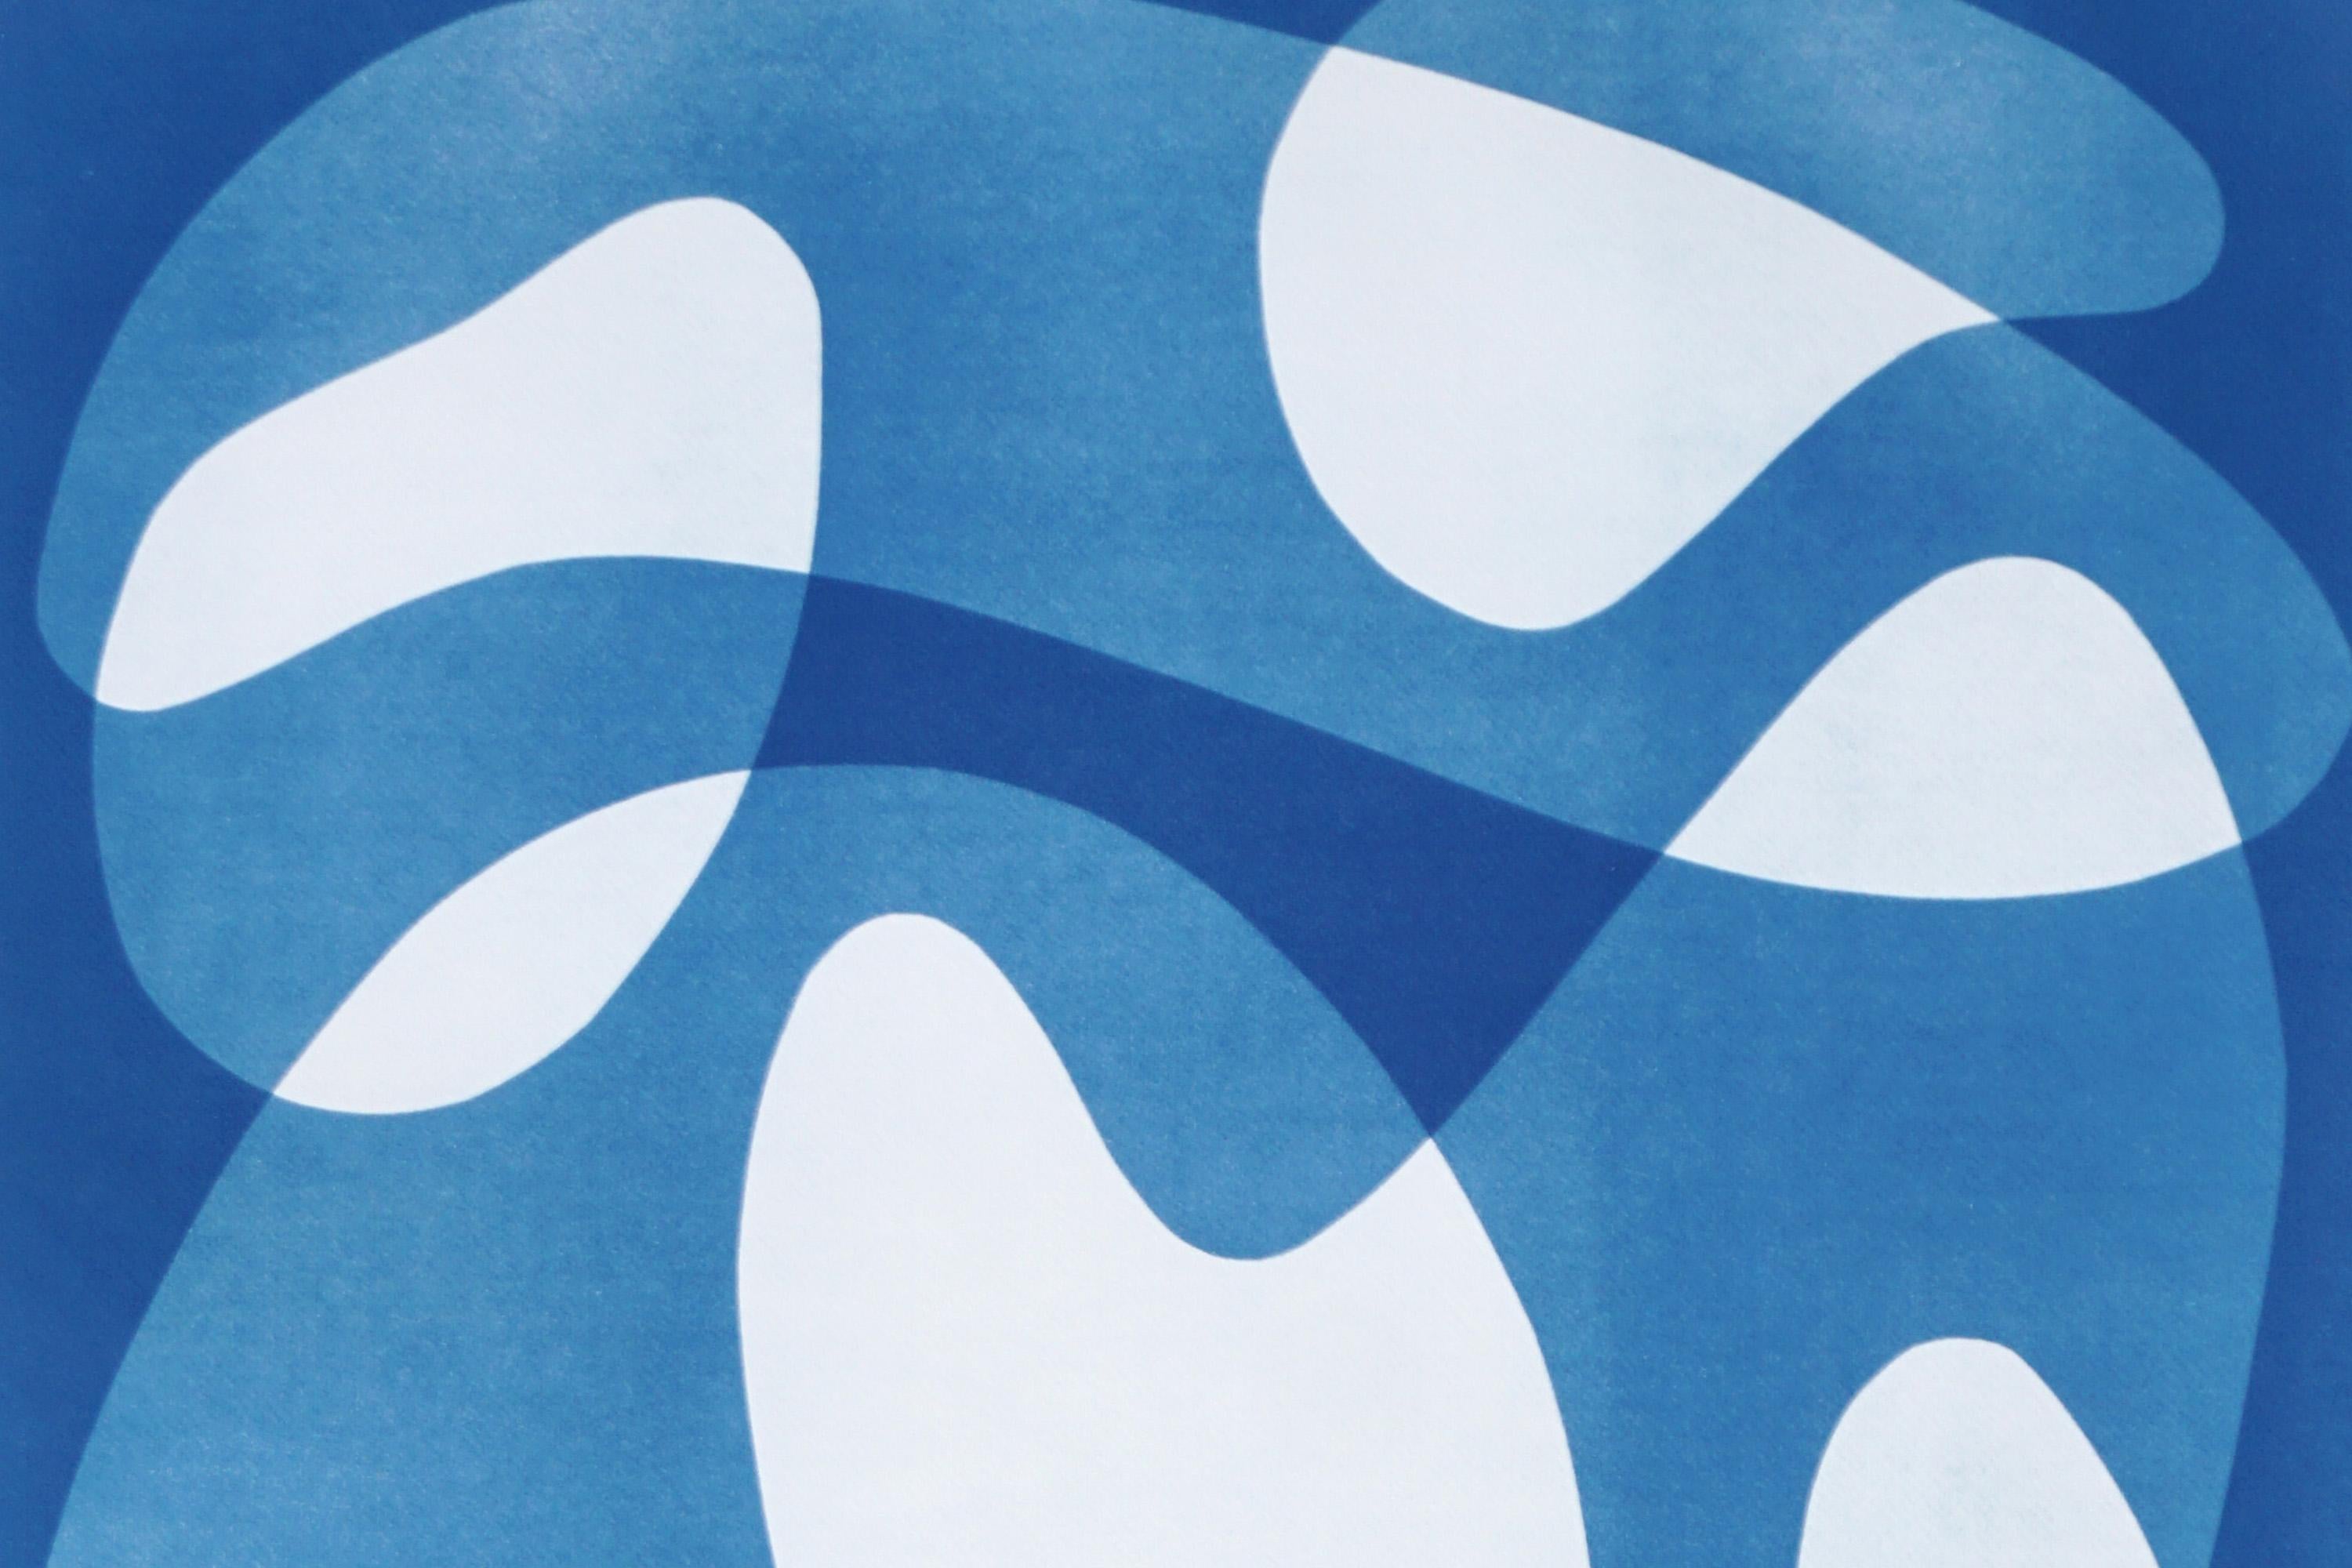 Mid-Century Shapes IV, White and Blue Abstract Floating Shapes, Unique Cyanotype - Bauhaus Print by Kind of Cyan